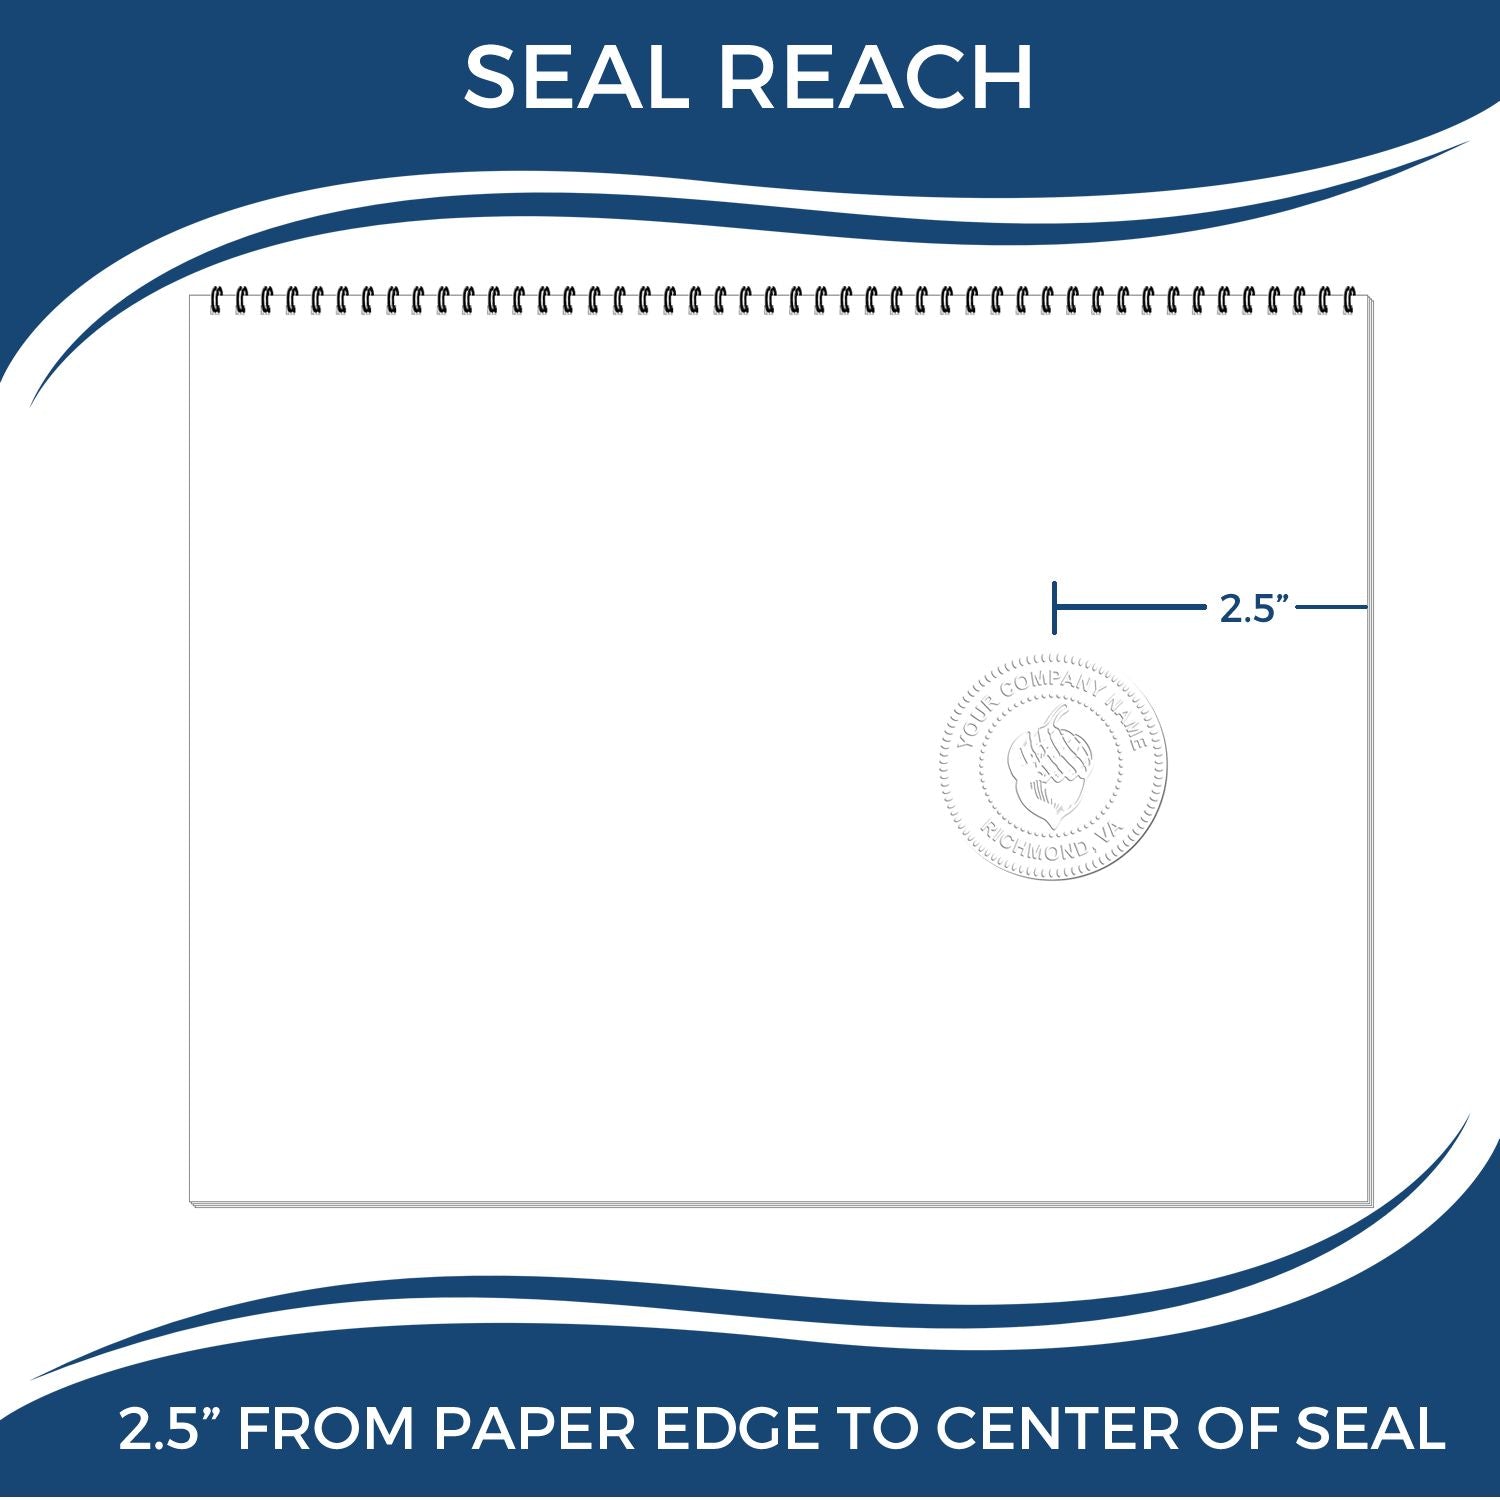 An infographic showing the seal reach which is represented by a ruler and a miniature seal image of the Heavy Duty Cast Iron Illinois Geologist Seal Embosser